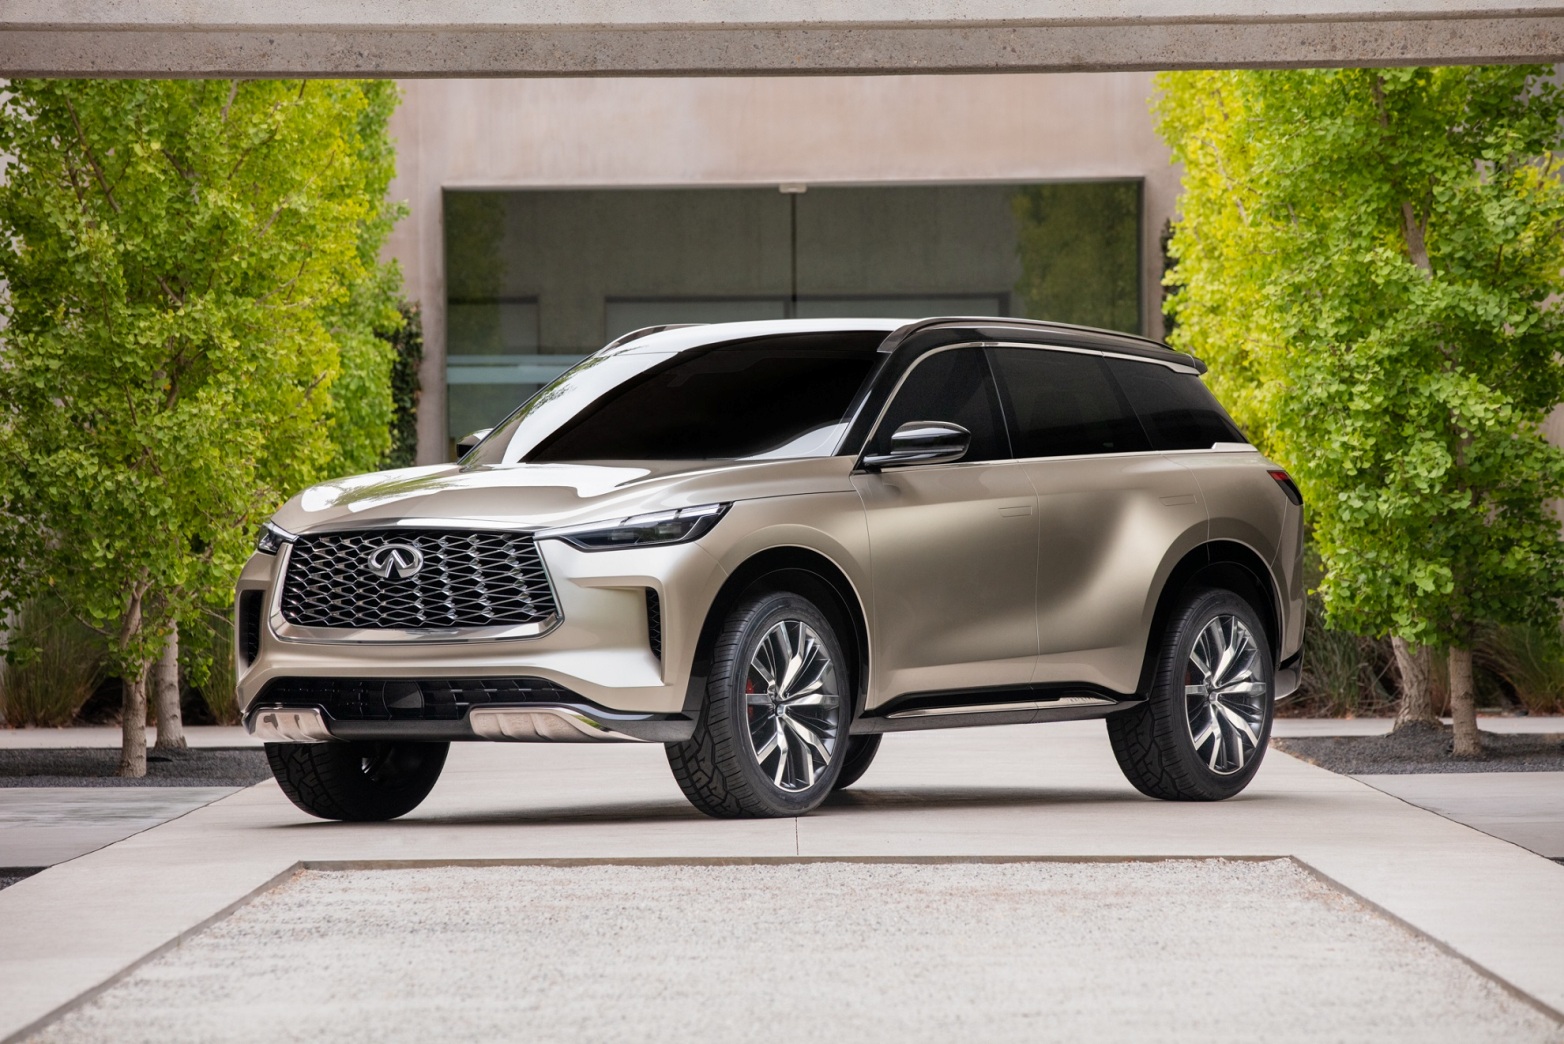 Infiniti QX60 Monograph Previews the Changes That Are Coming to Infiniti's Design Language